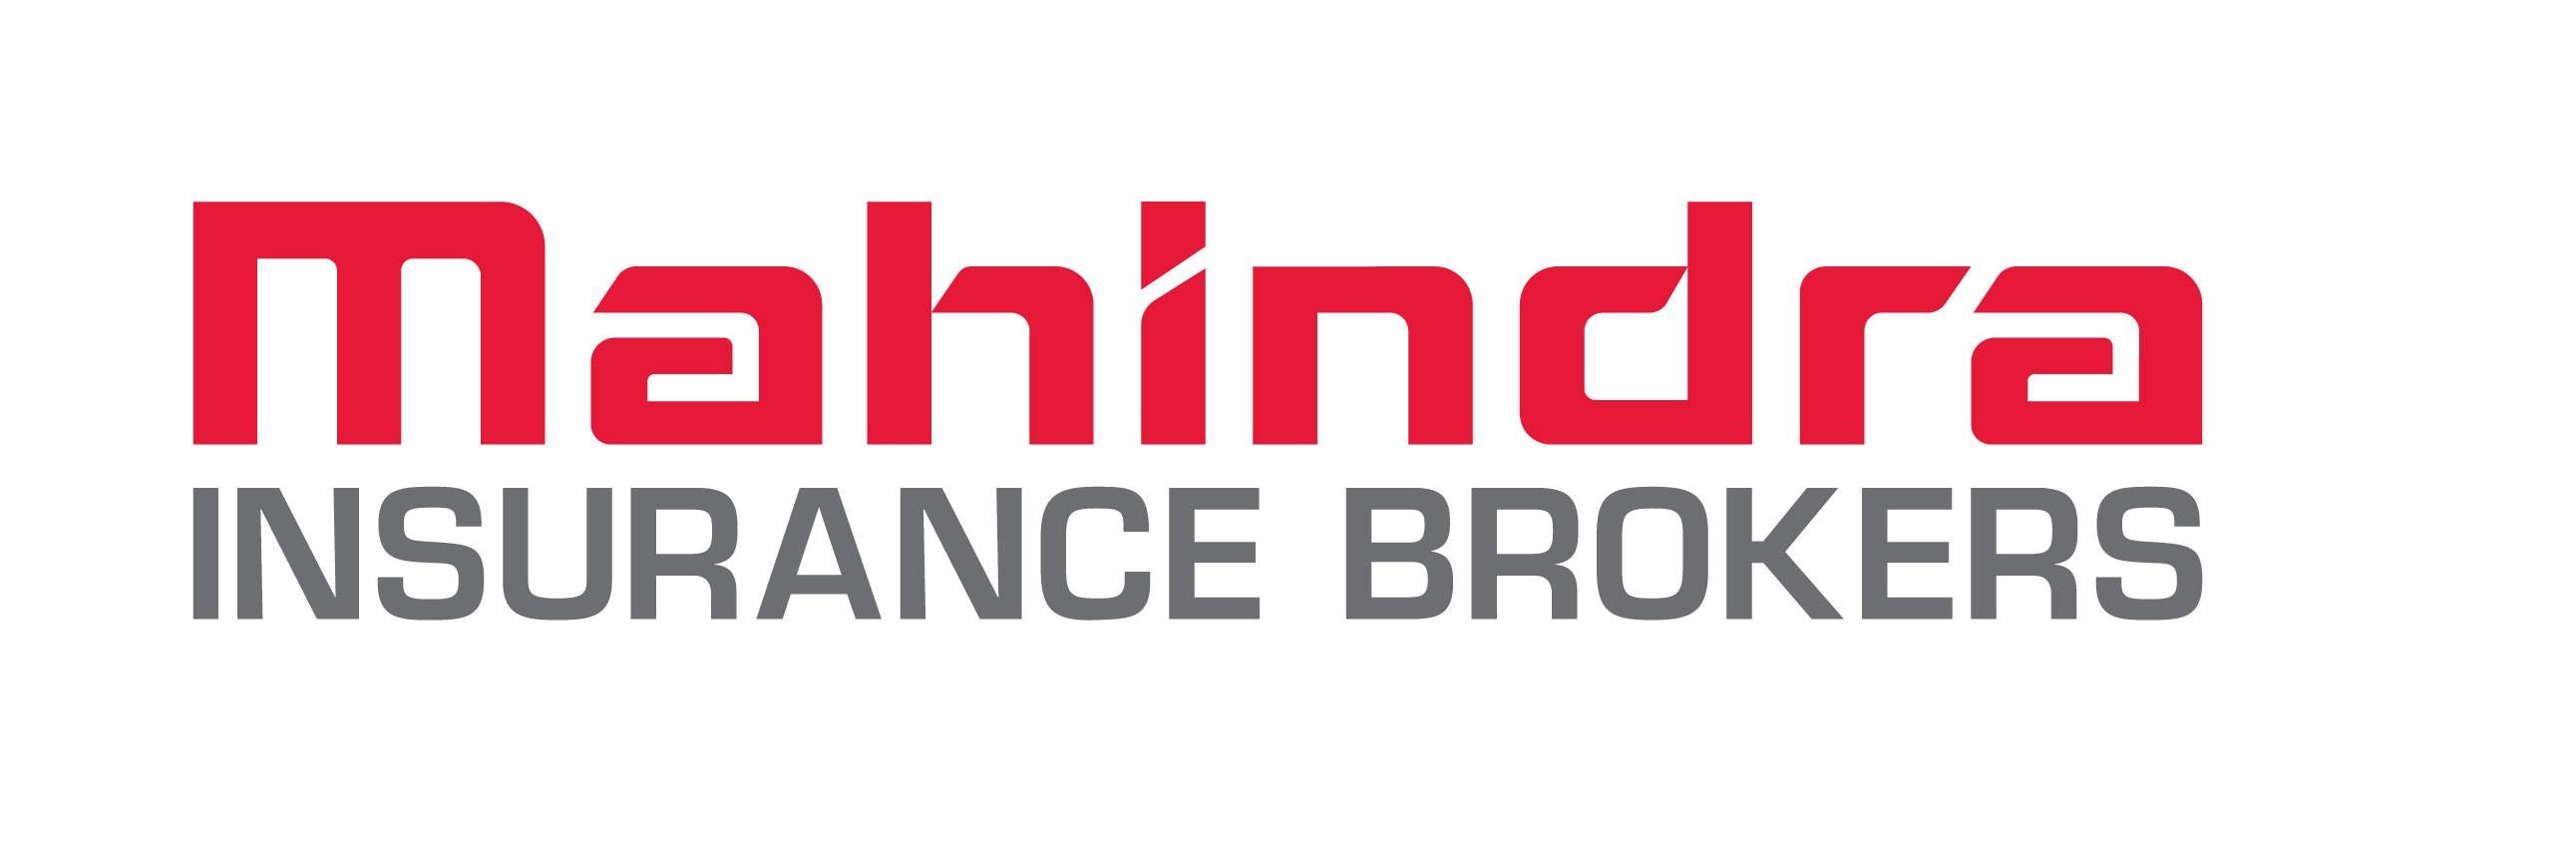 BOXOP ties up with Mahindra Insurance Brokers Ltd to provide low cost Insurance protection services across Kerala